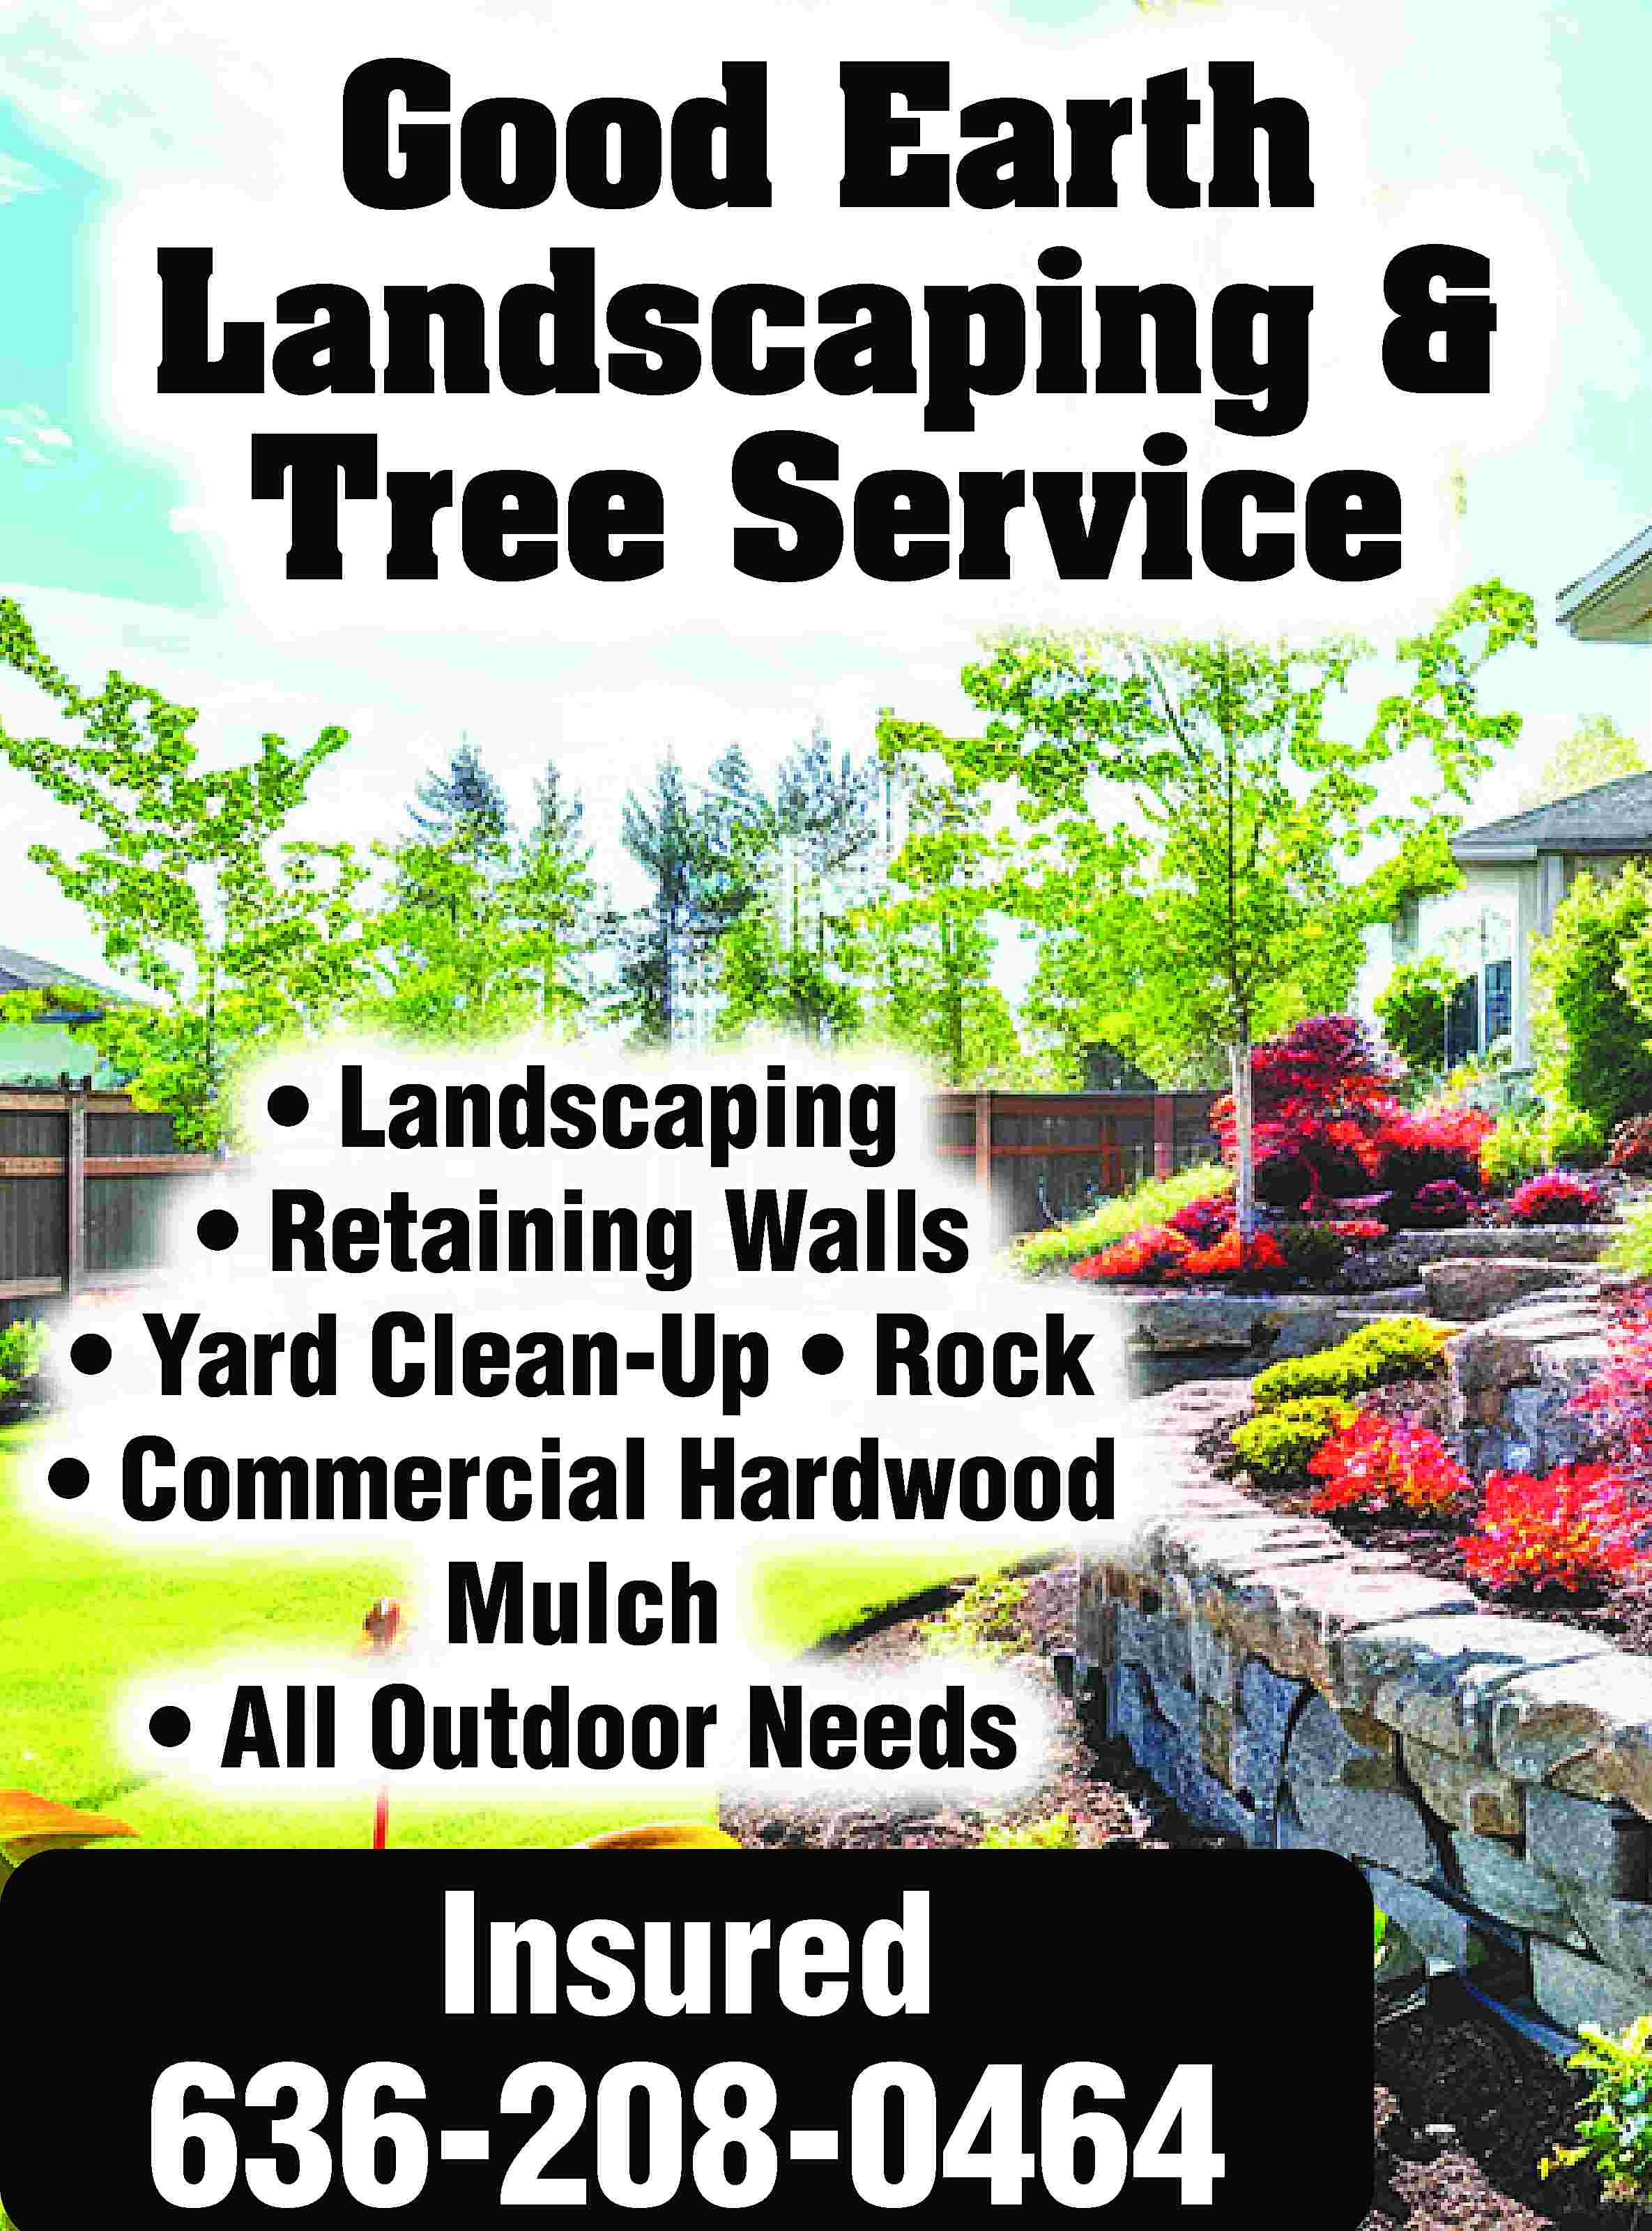 Good Earth Landscaping & Tree  Good Earth Landscaping & Tree Service • Landscaping • Retaining Walls • Yard Clean-Up • Rock • Commercial Hardwood Mulch • All Outdoor Needs Insured 636-208-0464